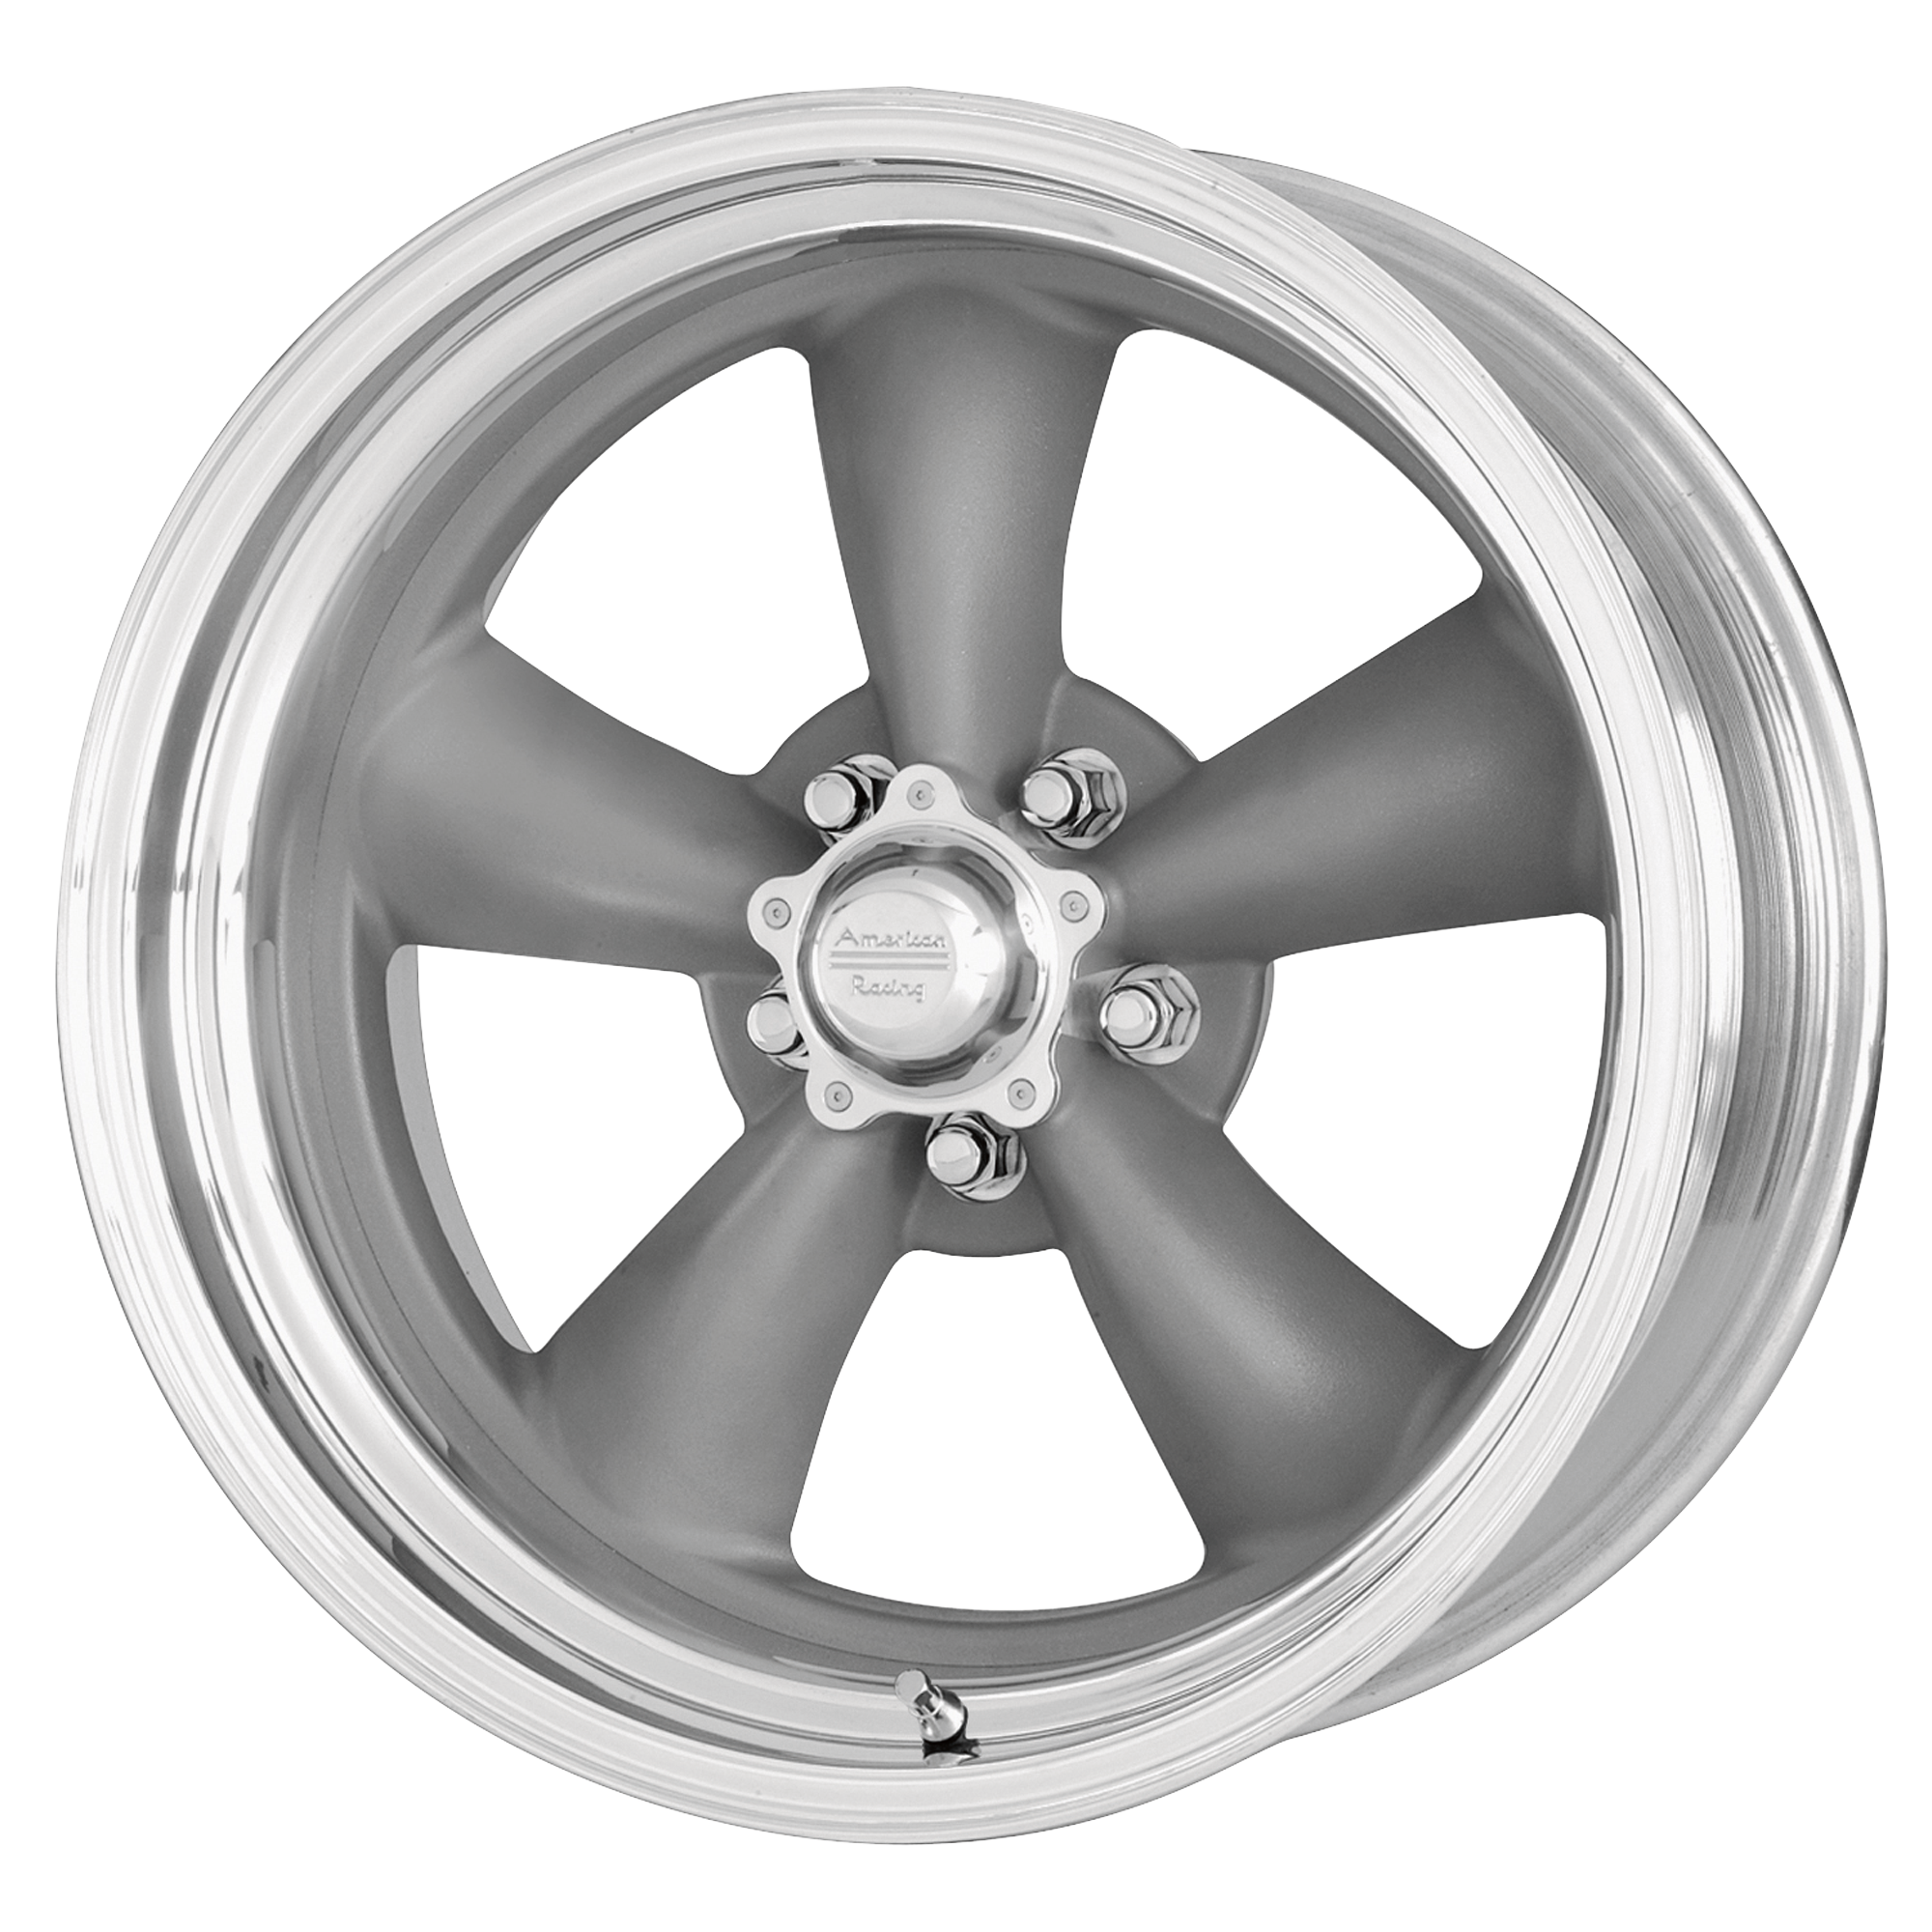 CLASSIC TORQ THRUST II ONE PIECE 14x7 5x114.30 MAG GRAY W/ MACHINED LIP (0 mm) - Tires and Engine Performance